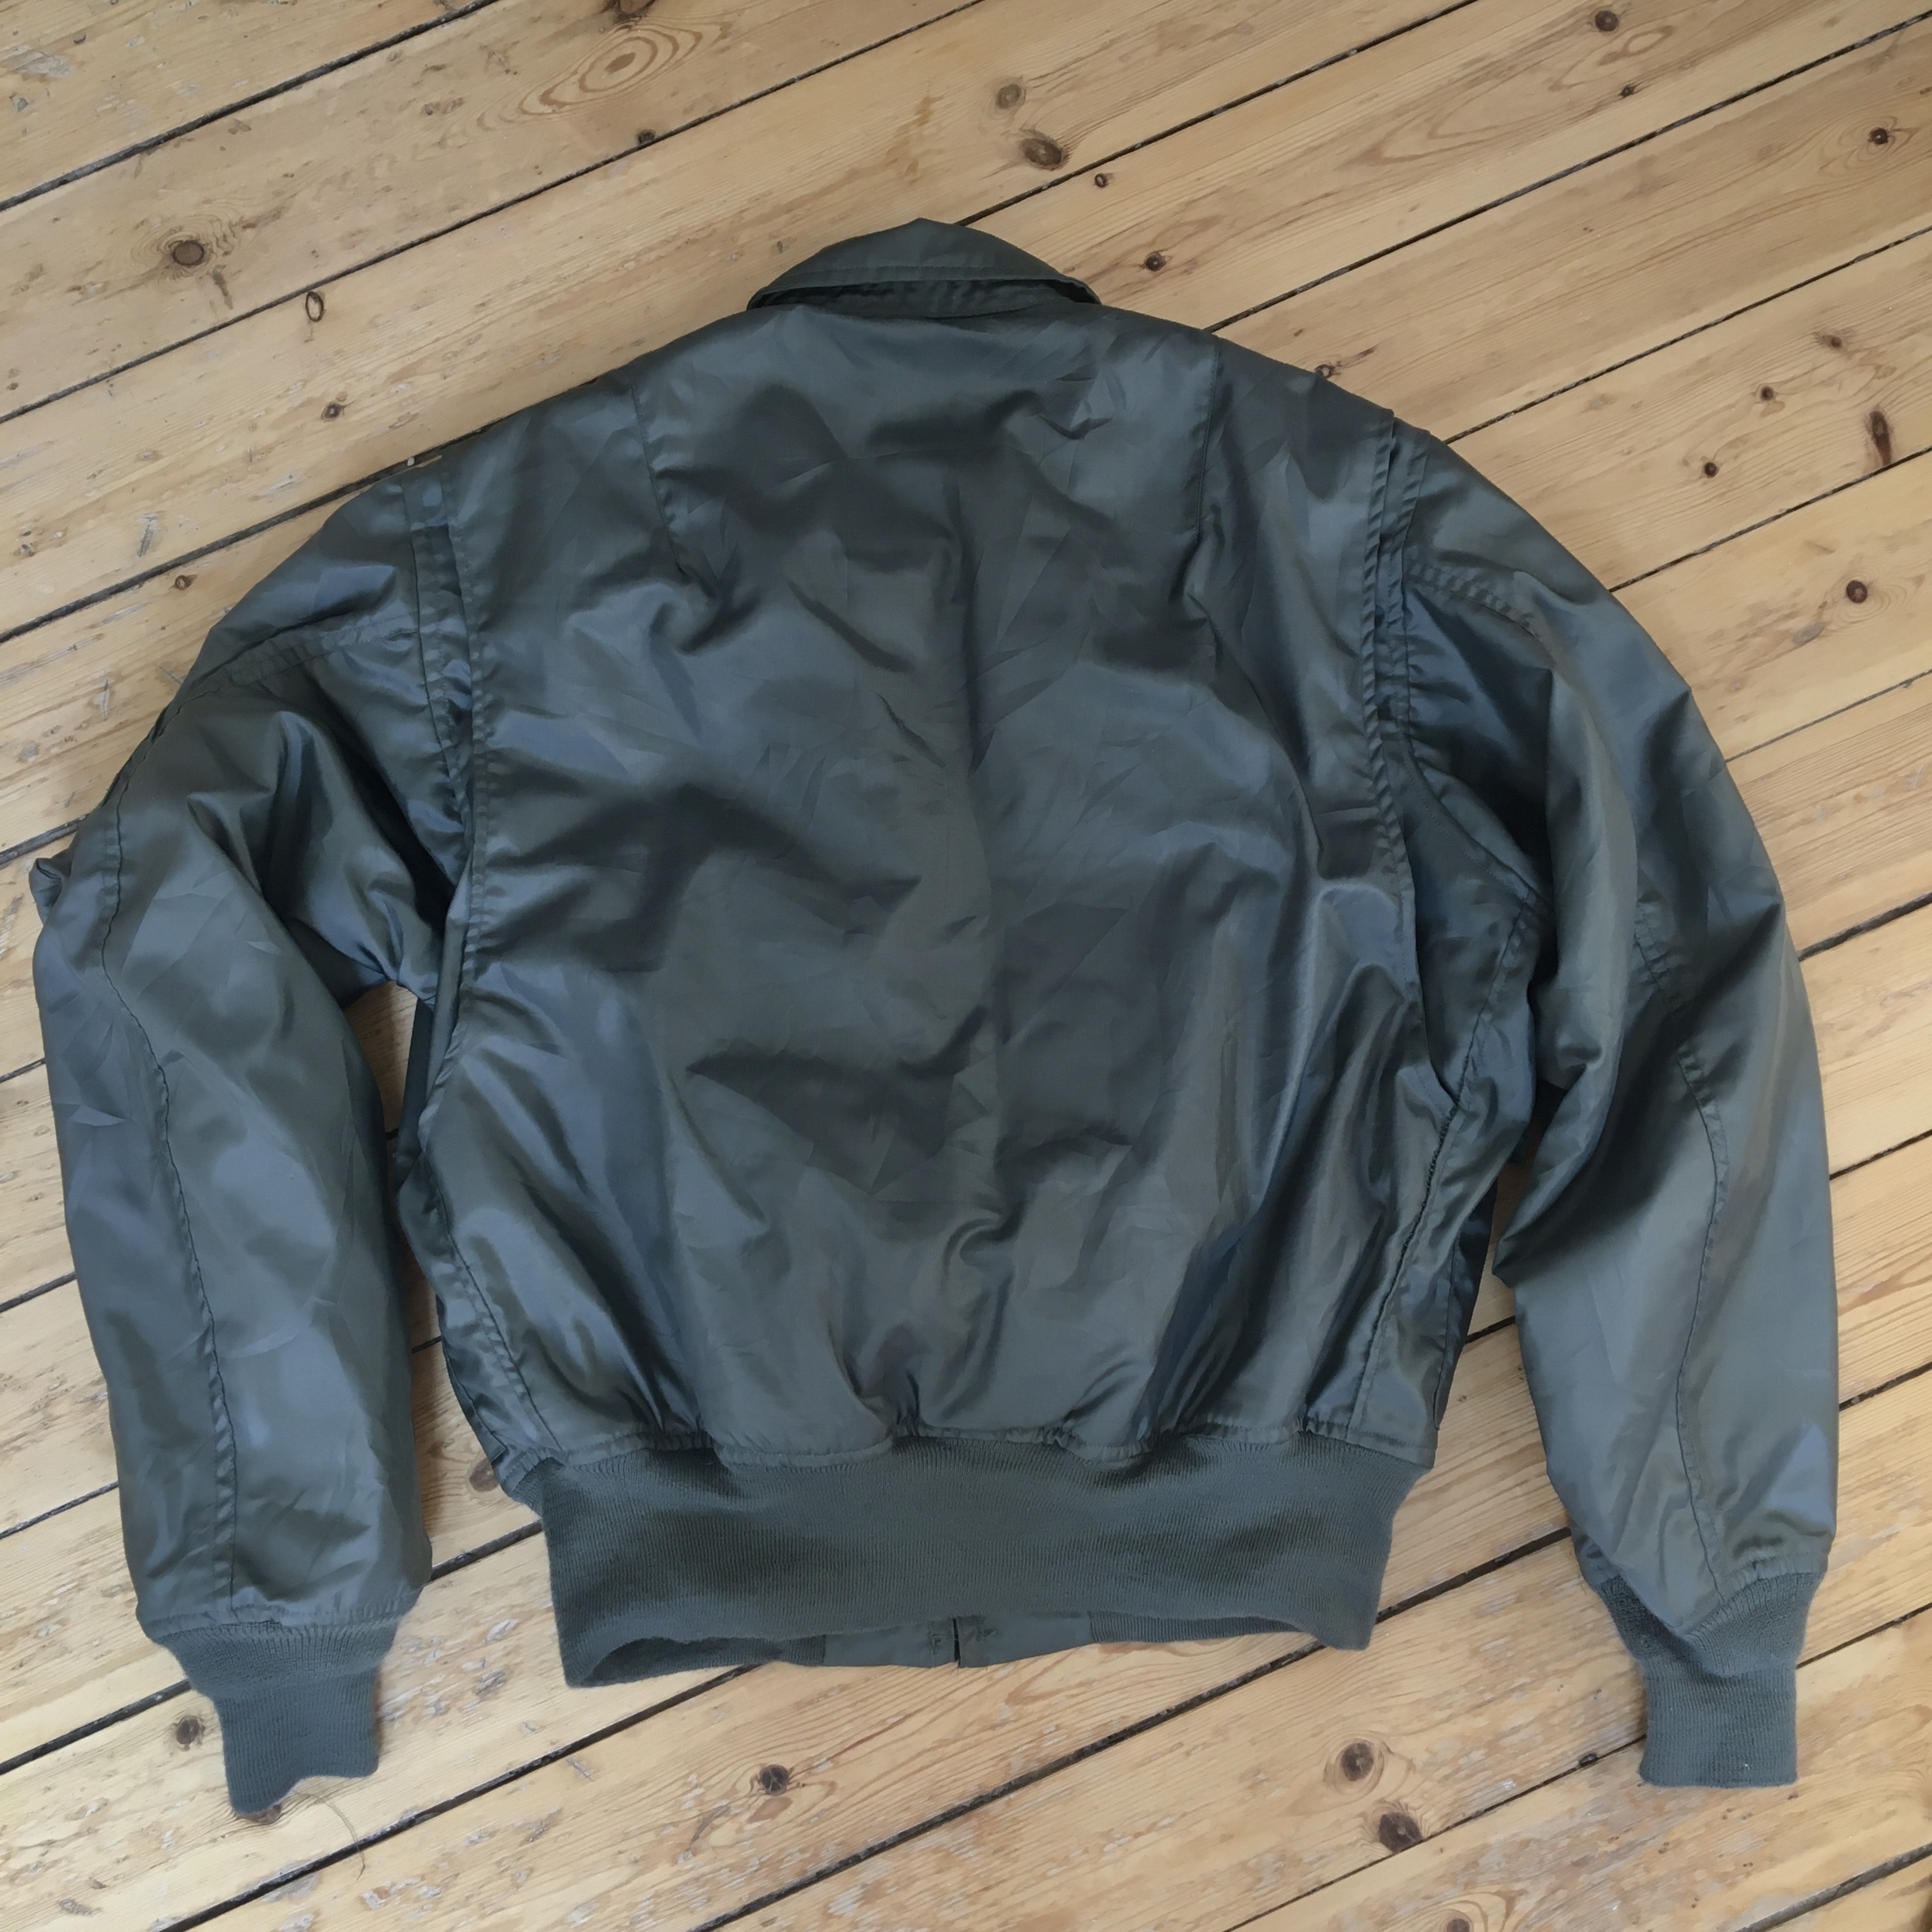 CWU 36/P from 1977? | Vintage Leather Jackets Forum